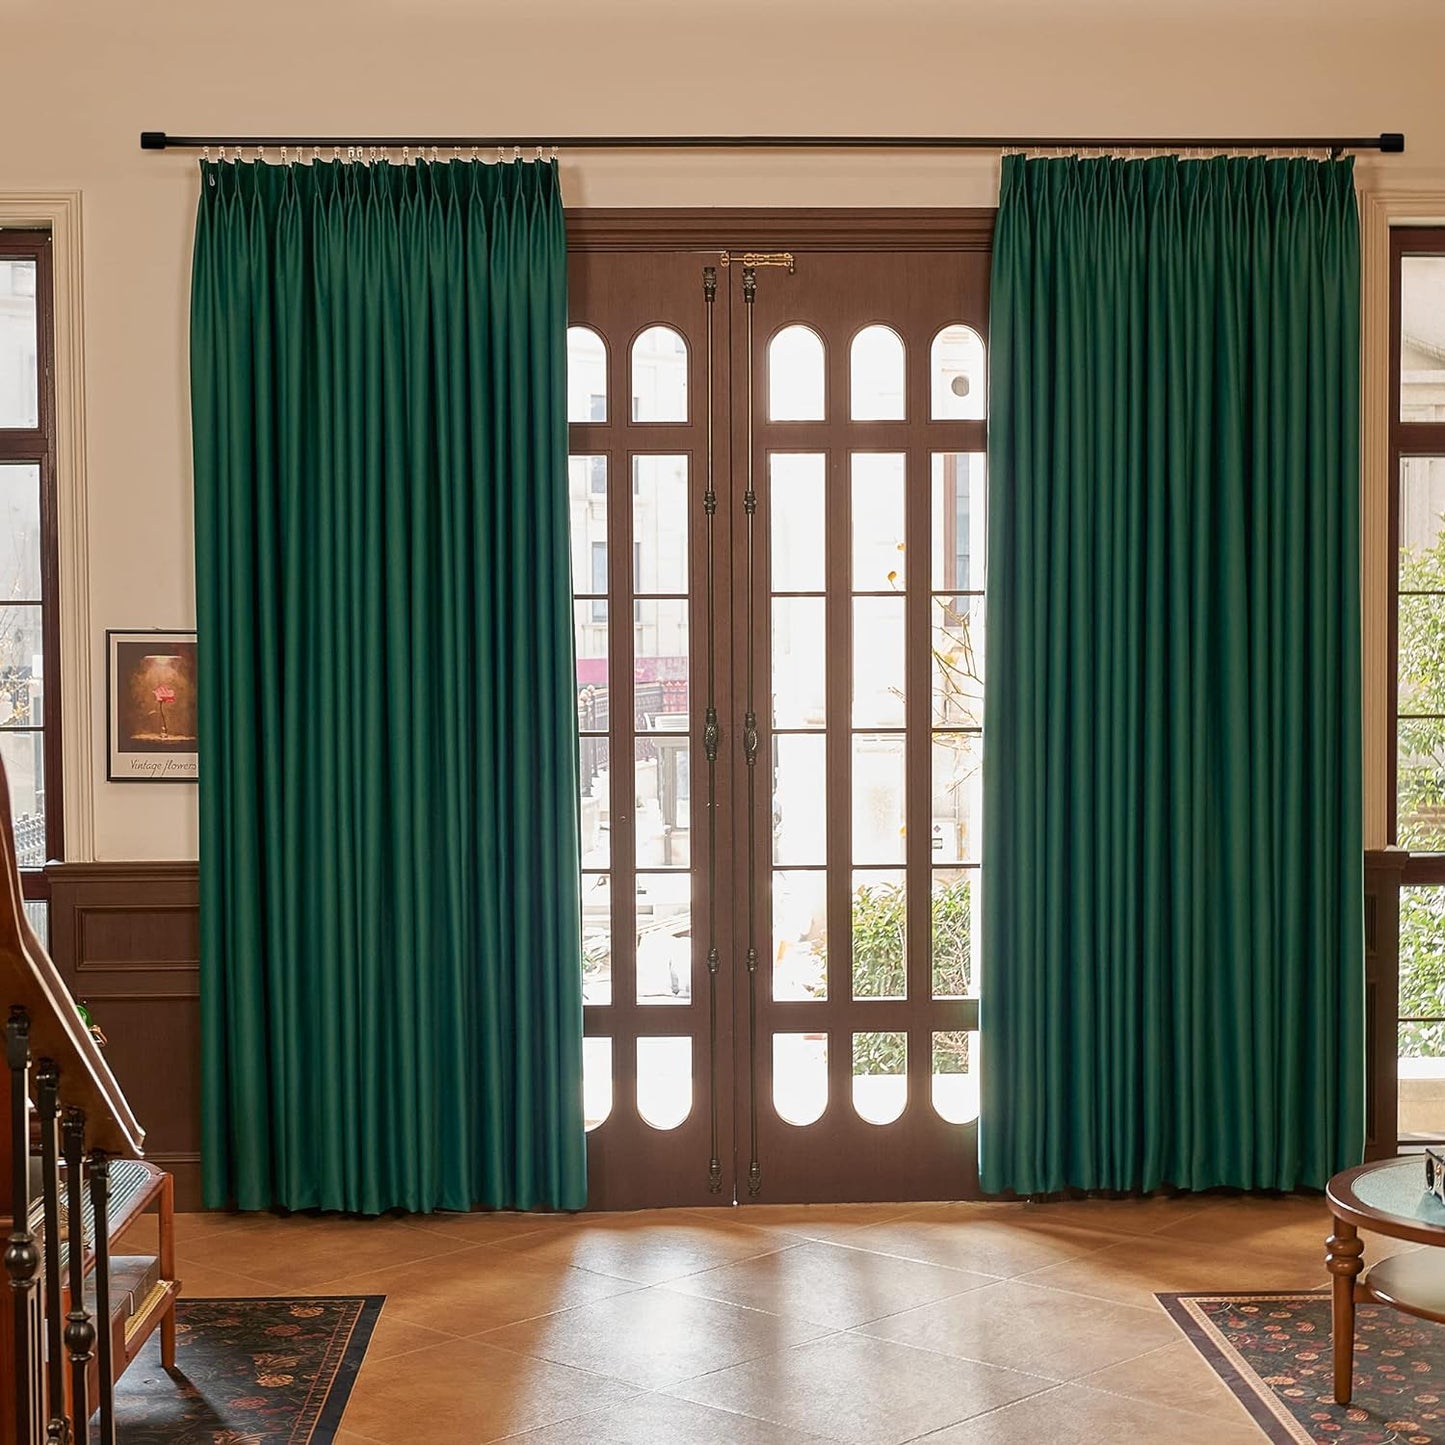 HUTO Beige Pinch Pleated Curtains Thermal Insulated Room Darkening Window Treatment Panel for Living Room, Bedroom, Kitchen, Small Window, 52 by 63 Inches Long, 1 Panel  HUTO Green 72"W X 96"L 